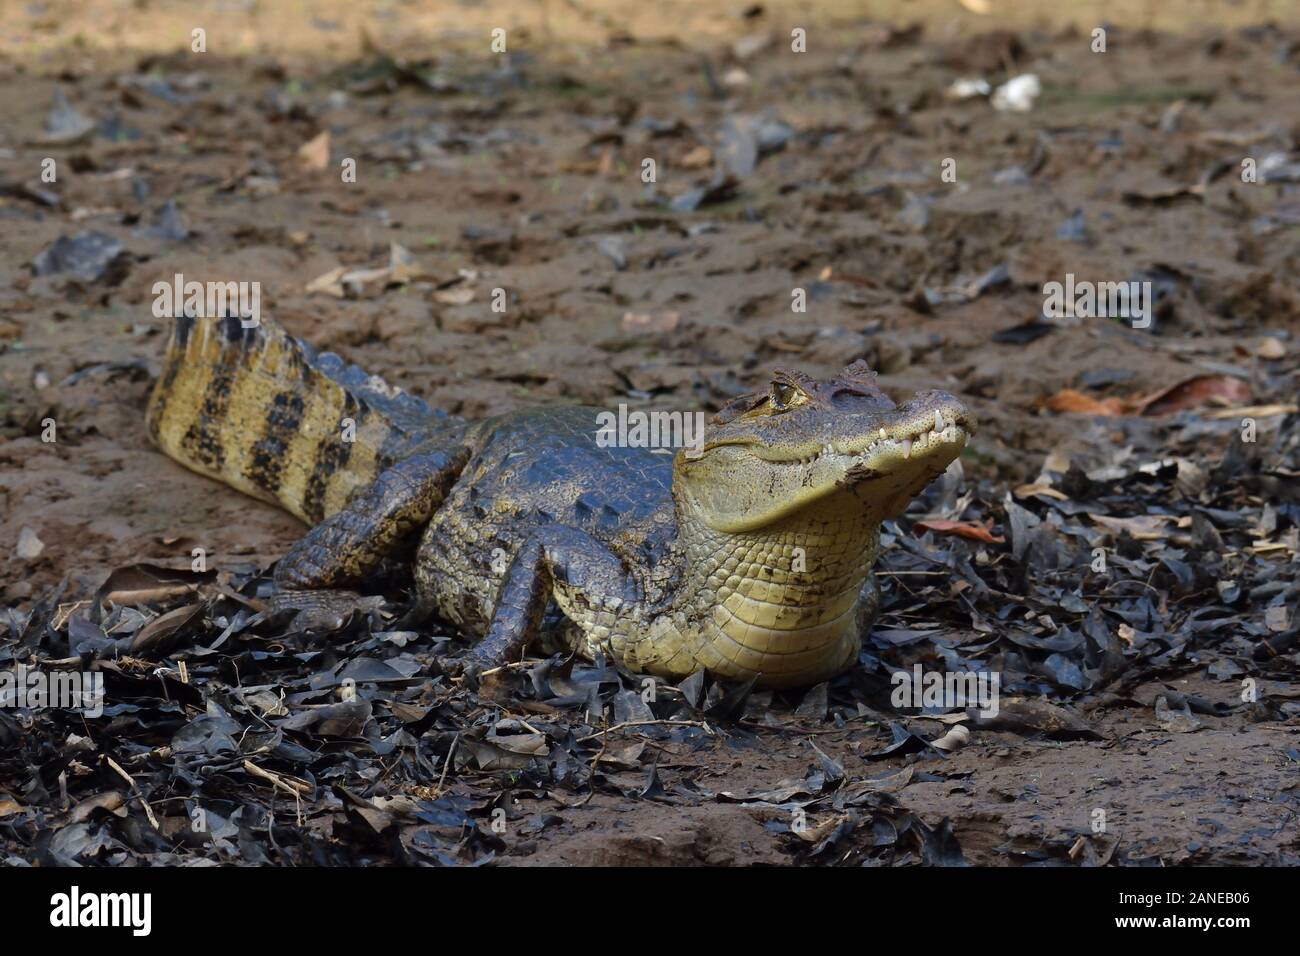 Spectacled Caiman in Costa Rican Swamp Stock Photo